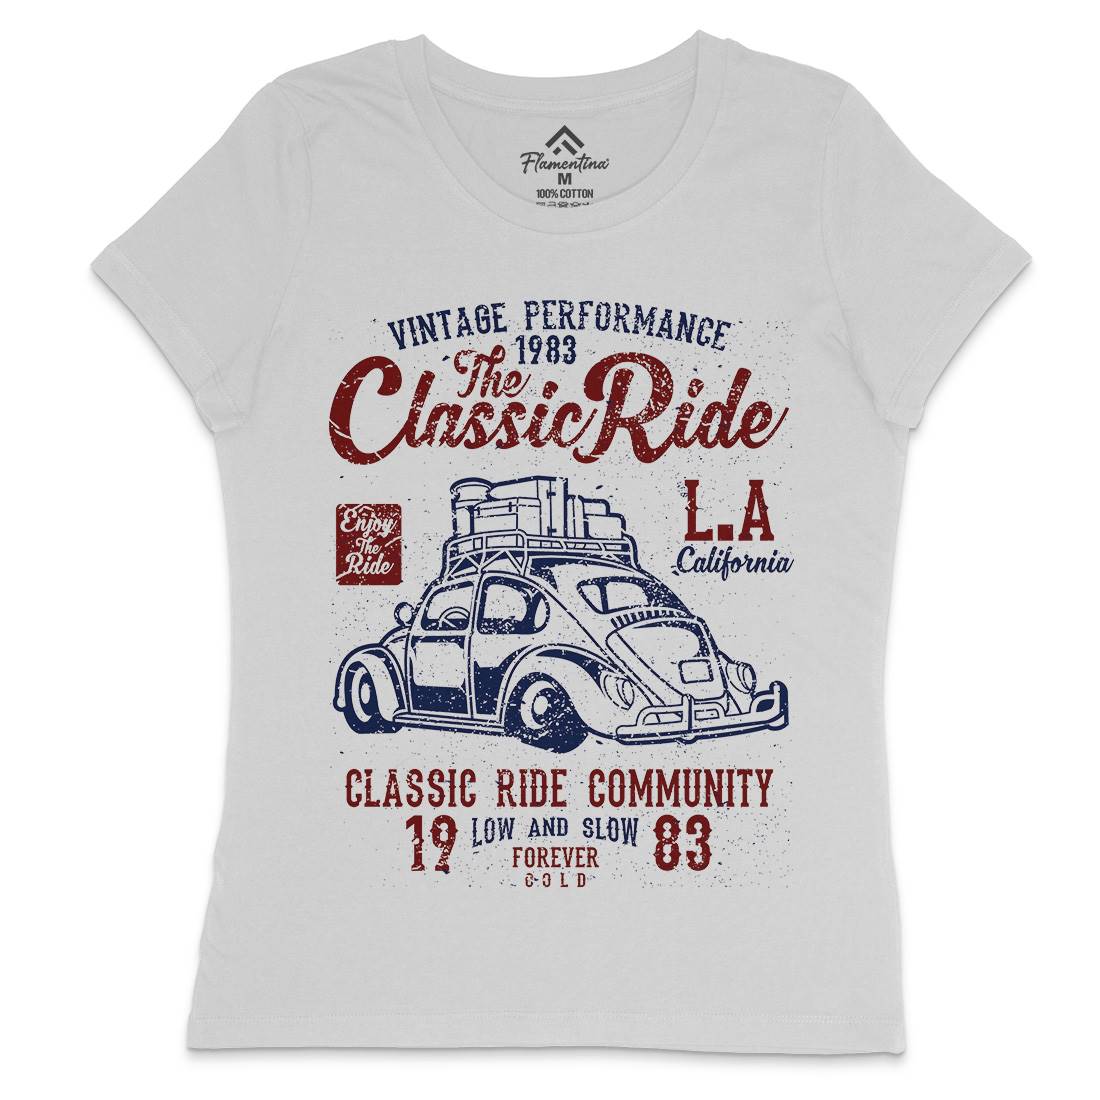 Classic Ride Womens Crew Neck T-Shirt Cars A171